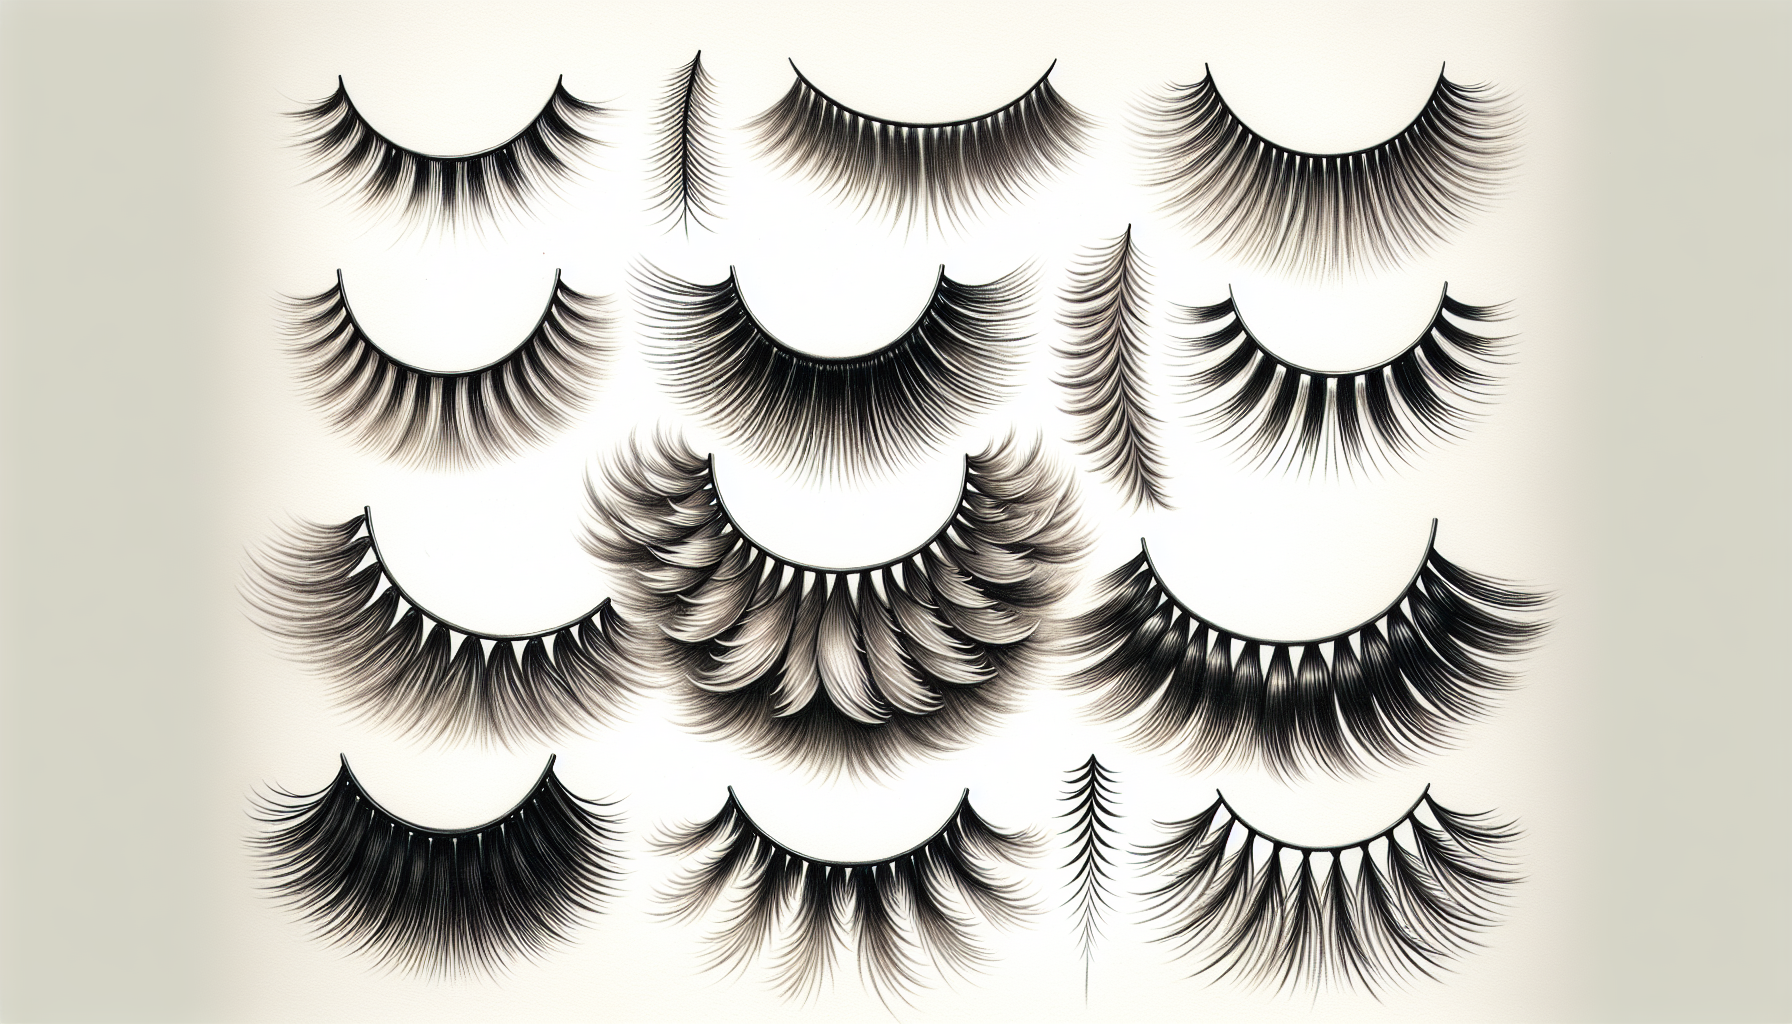 Illustration of different types of lash extensions